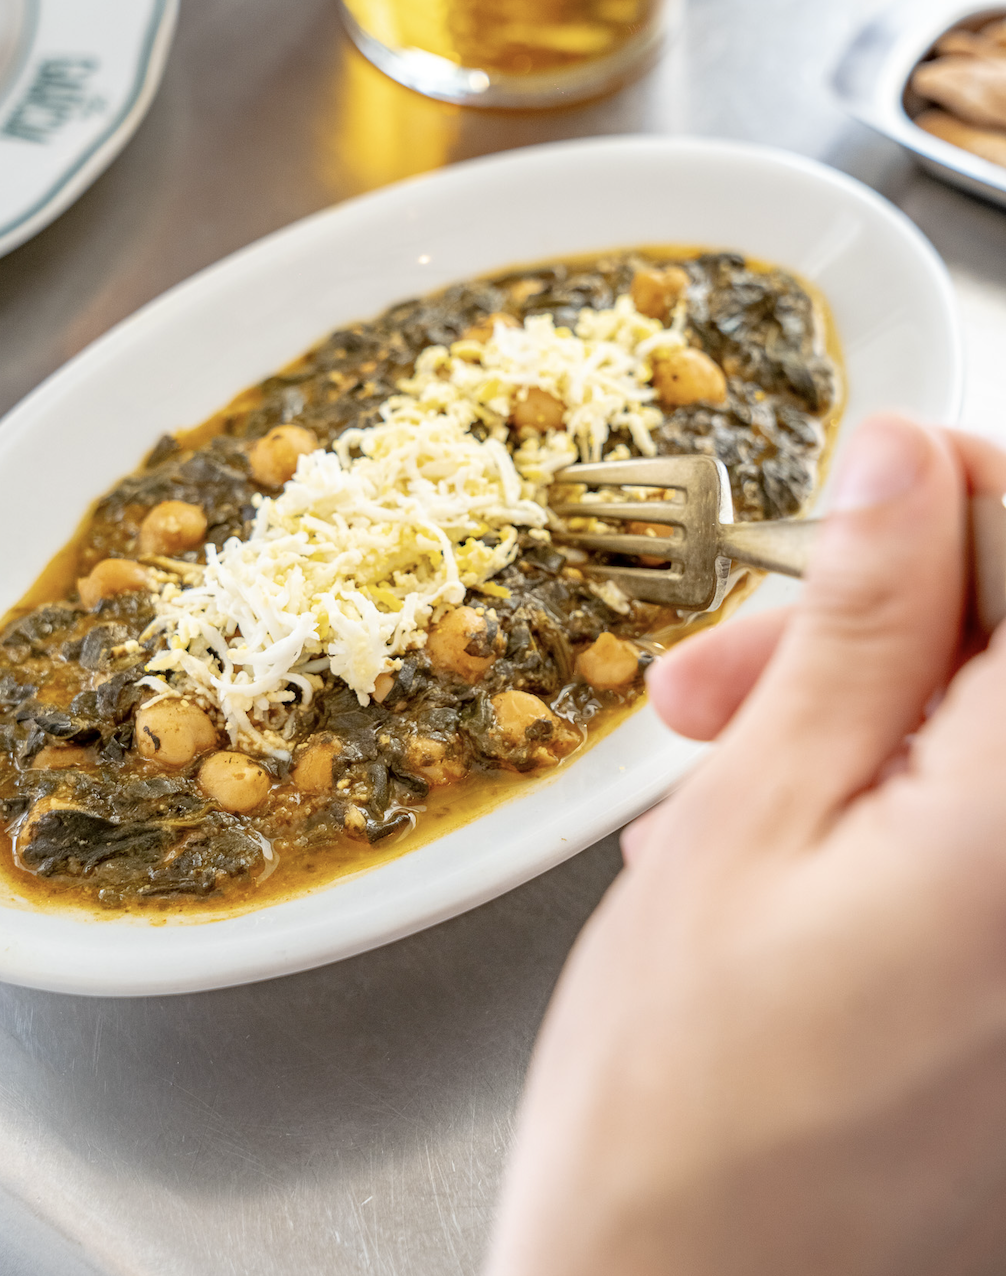 Spinach with chickpeas in Sevillian ways